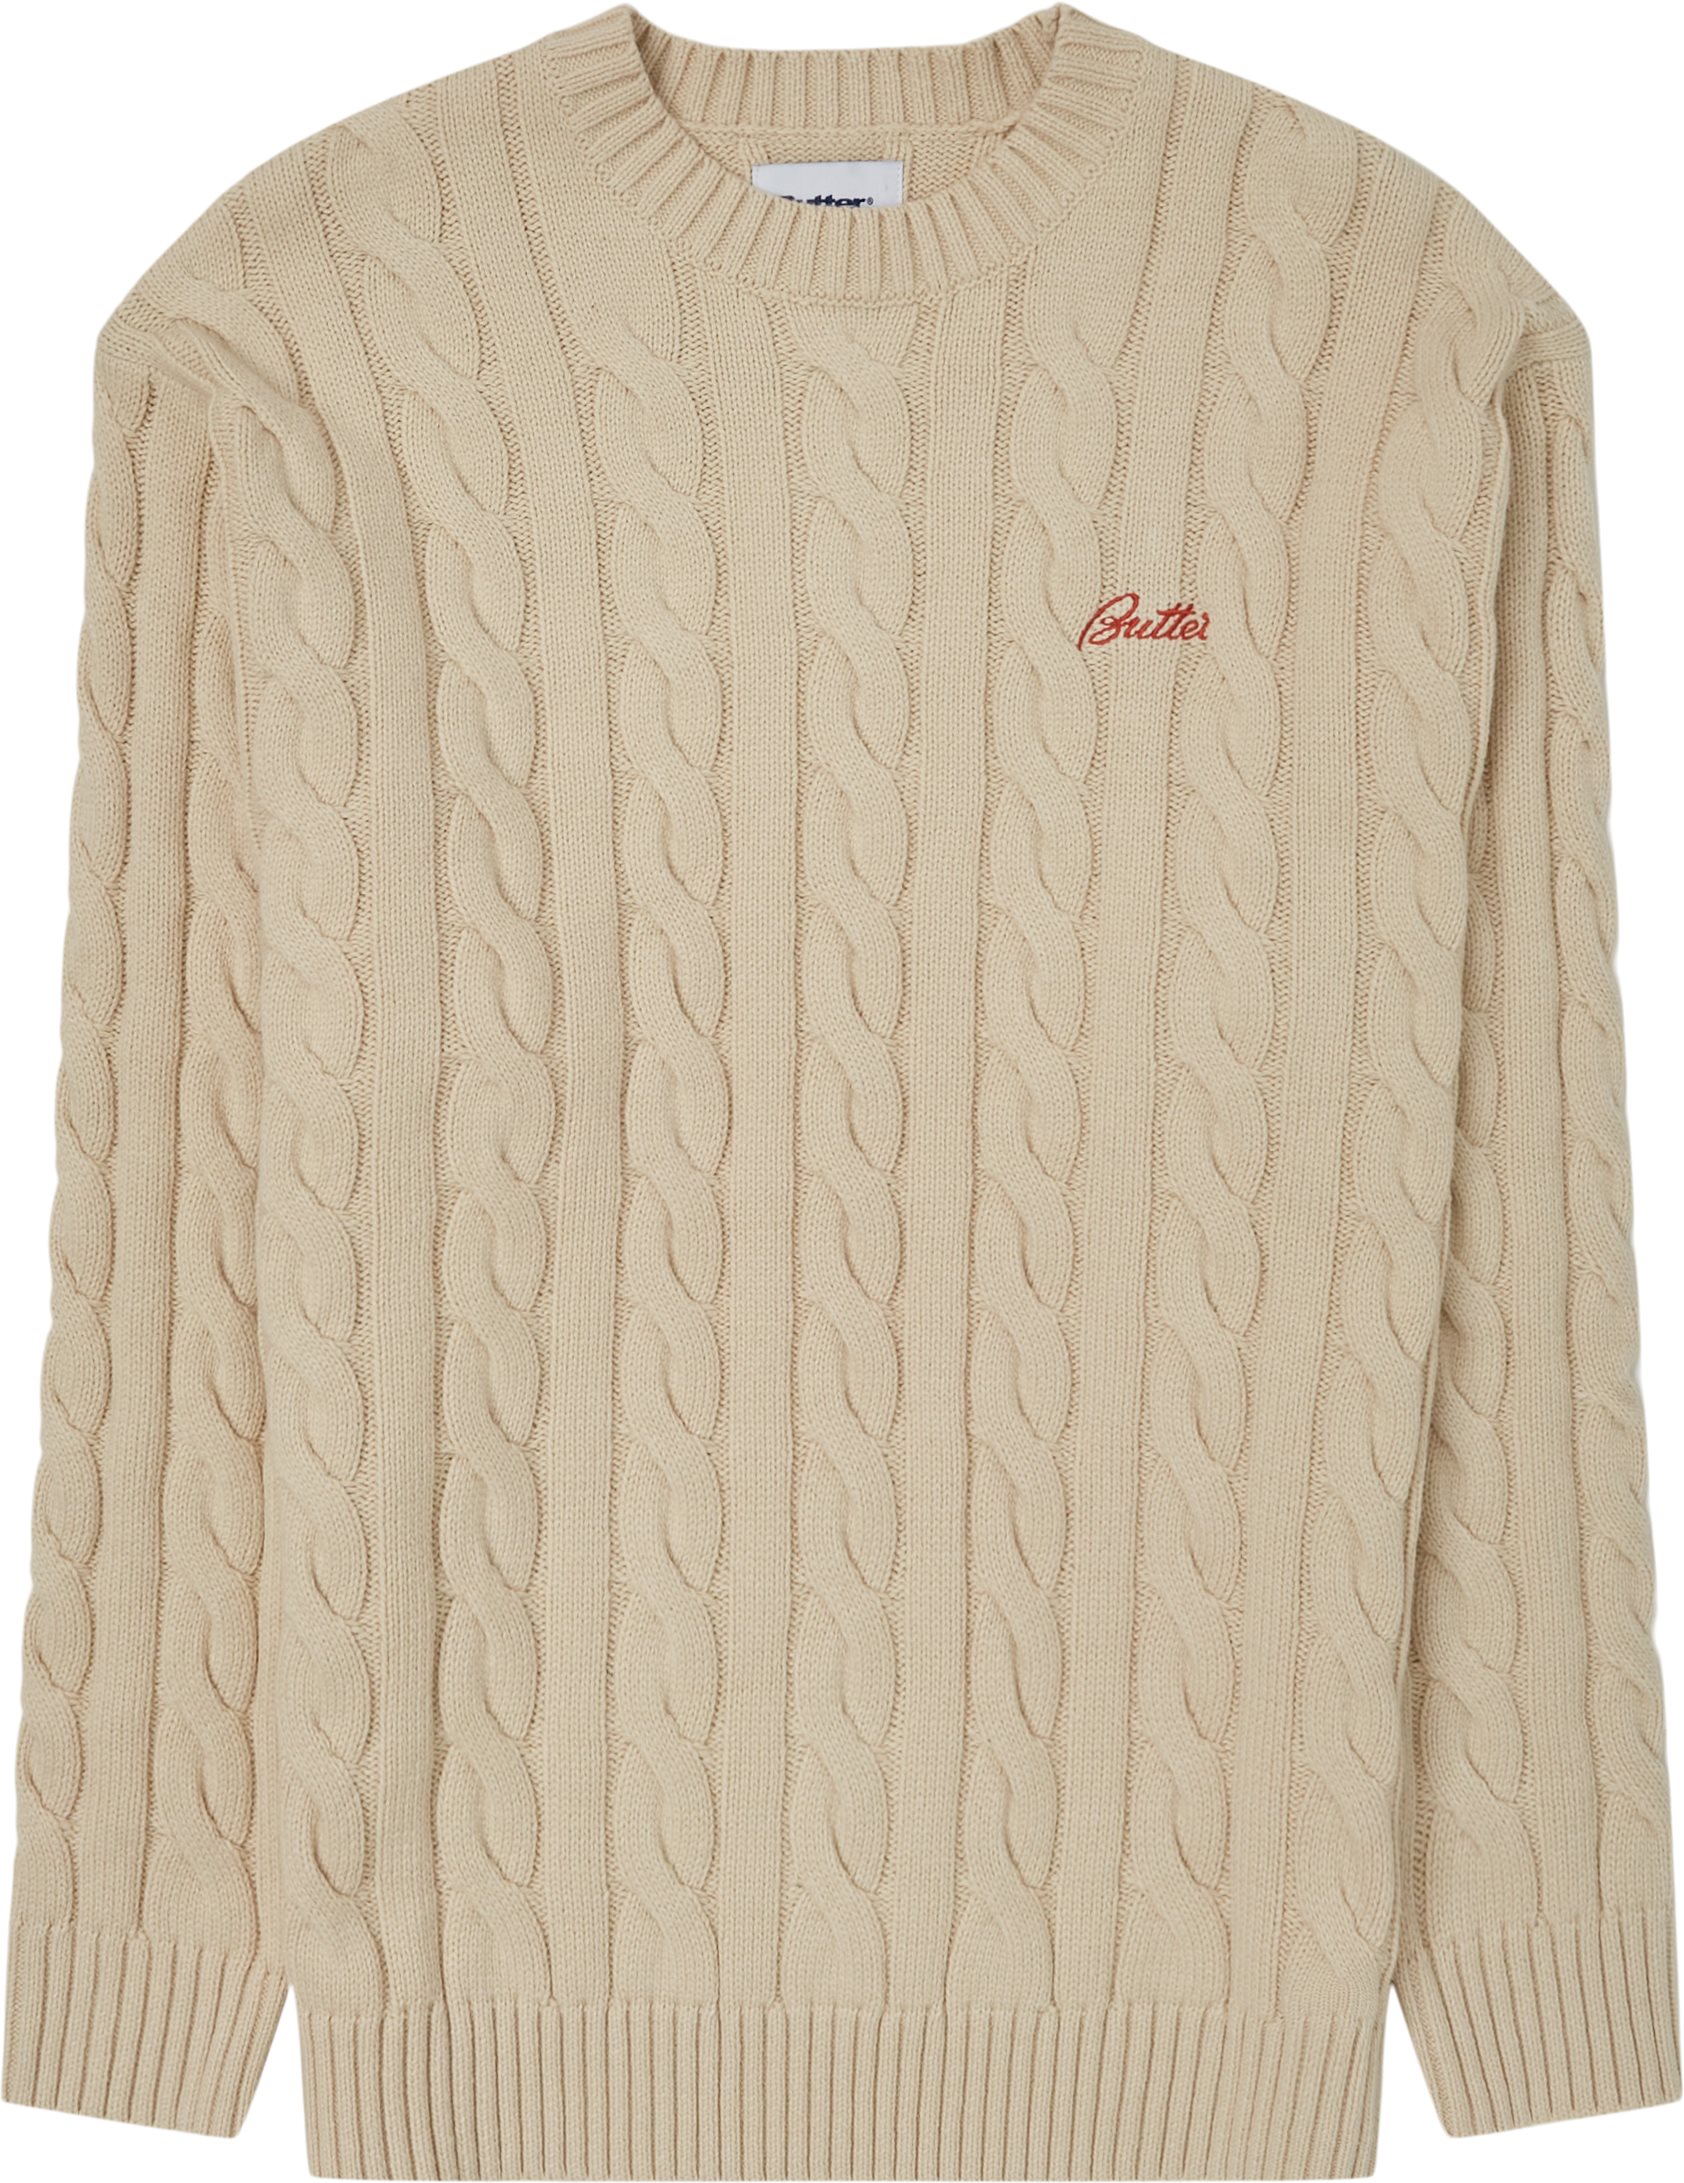 Cable Knit Sweater - Knitwear - Regular fit - Sand